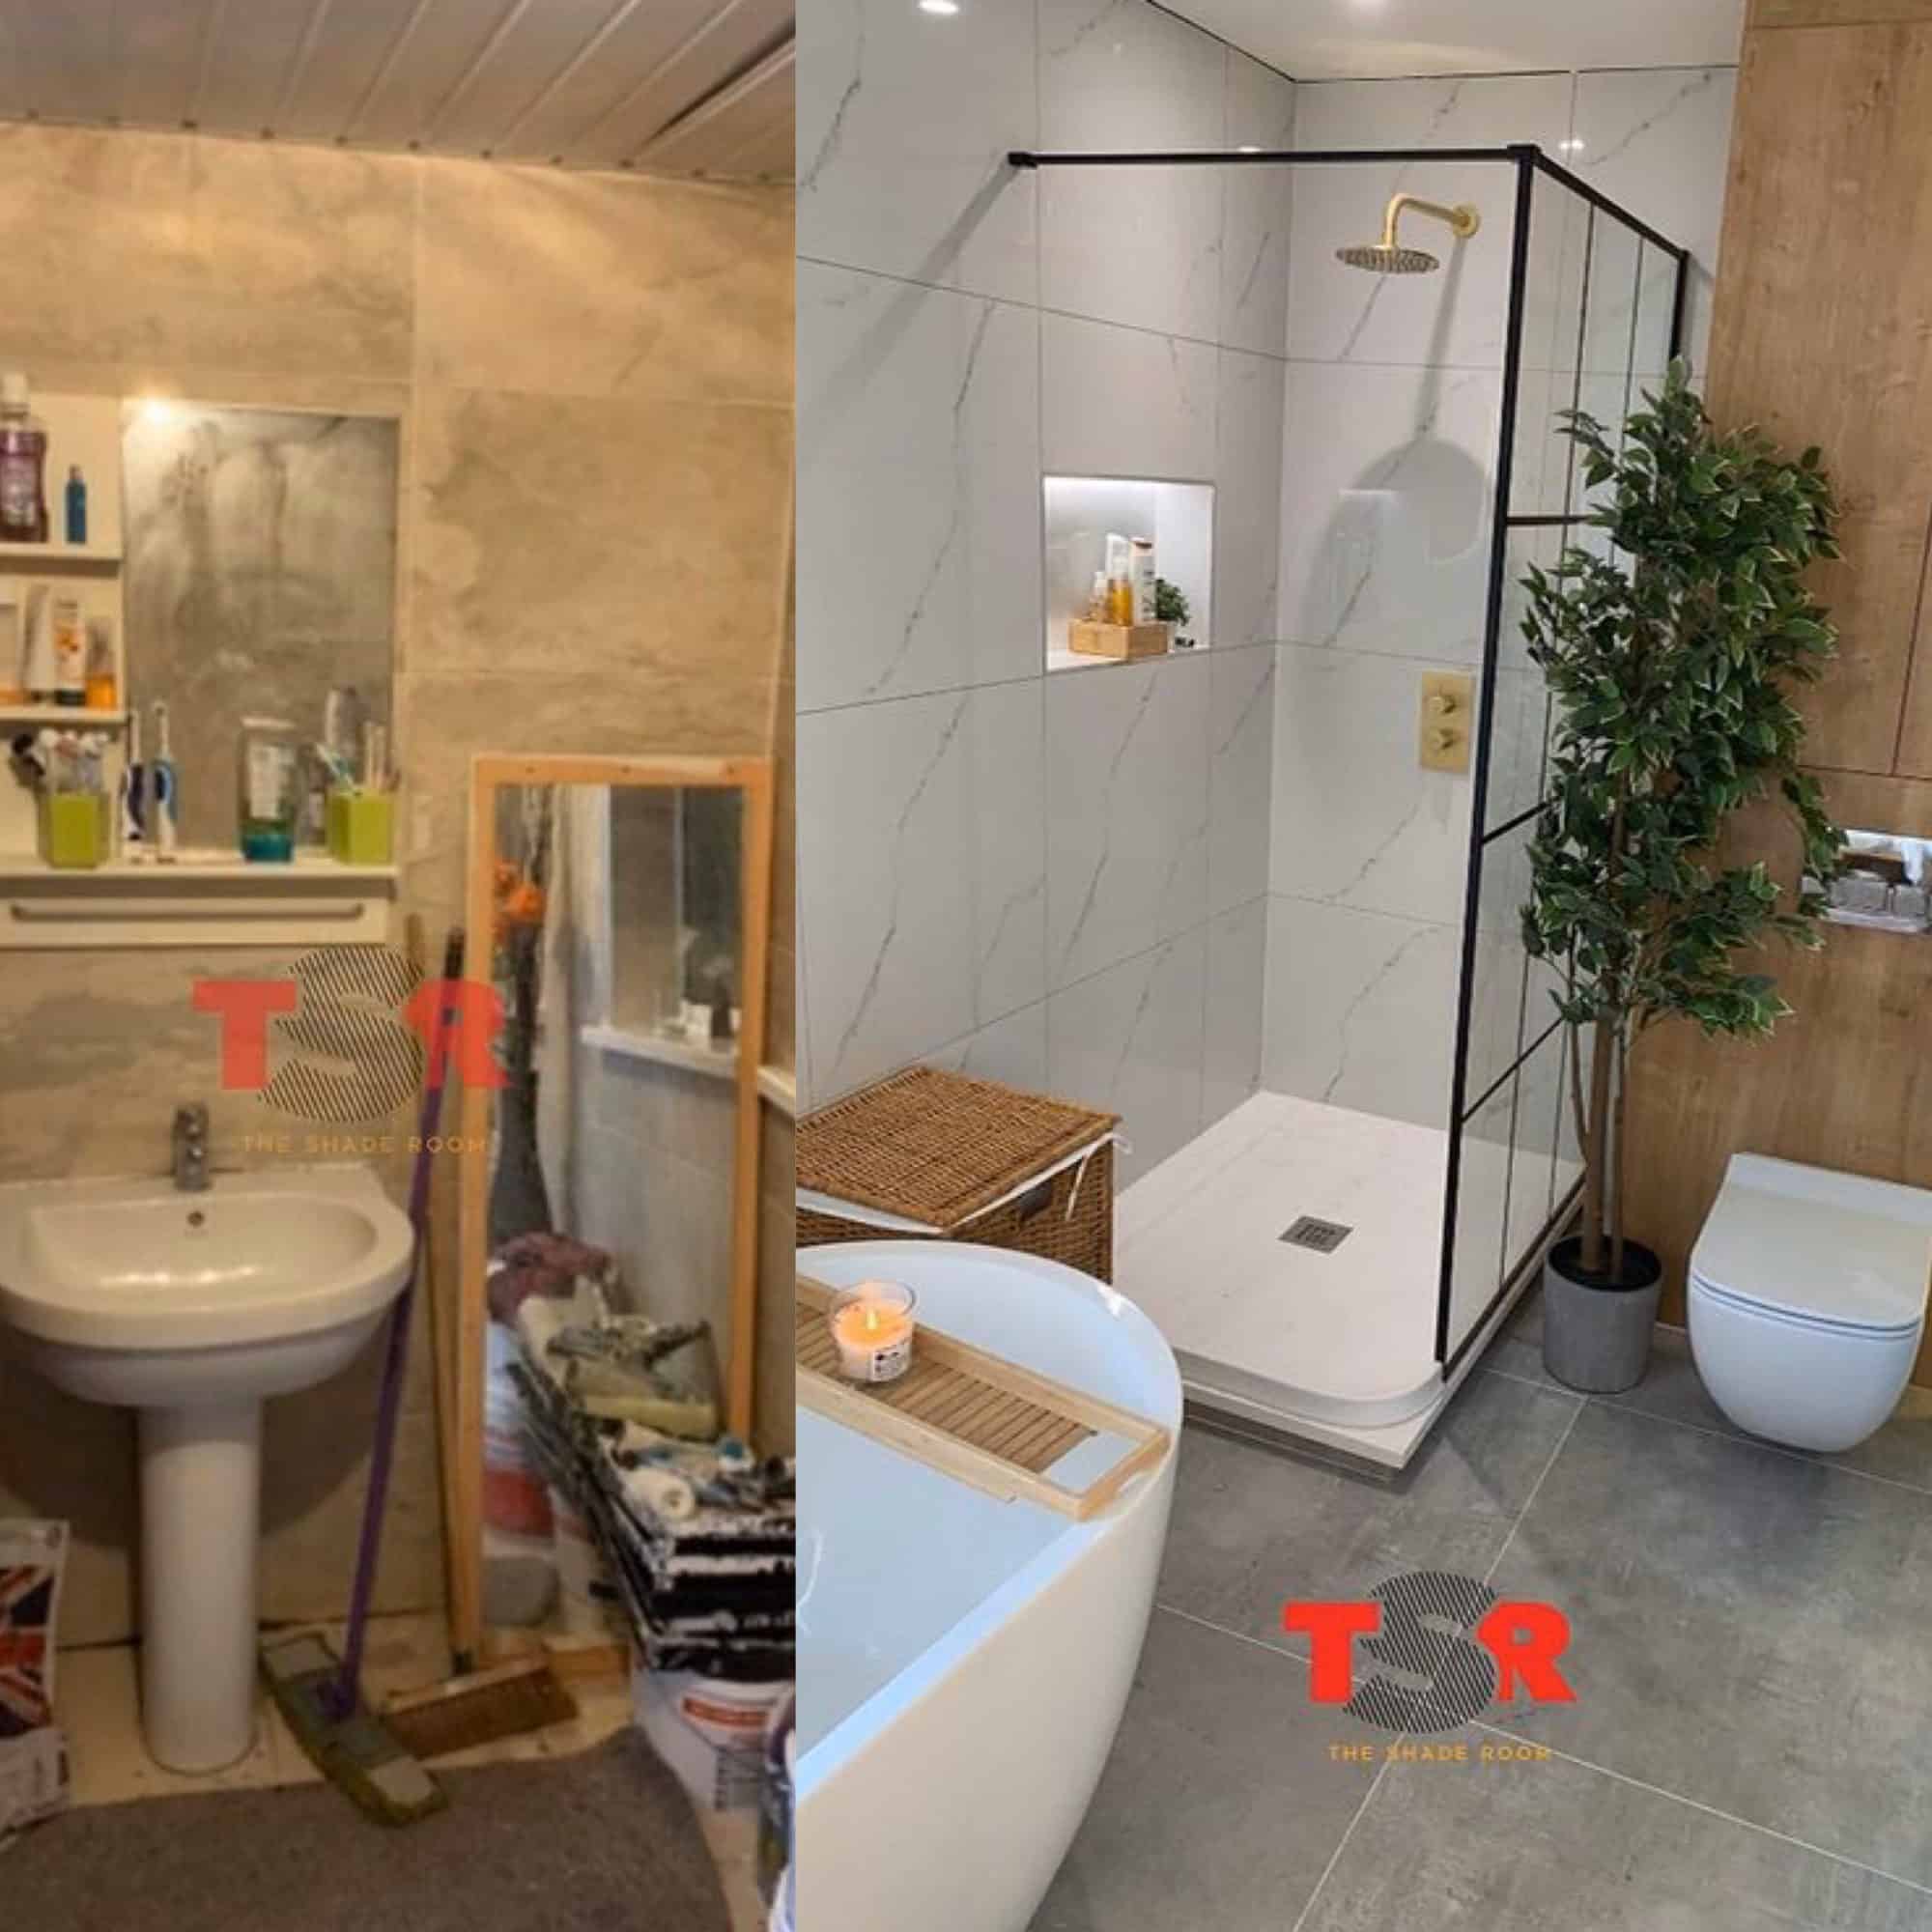 Peep this bomb bathroom makeover this man did after watching YouTube